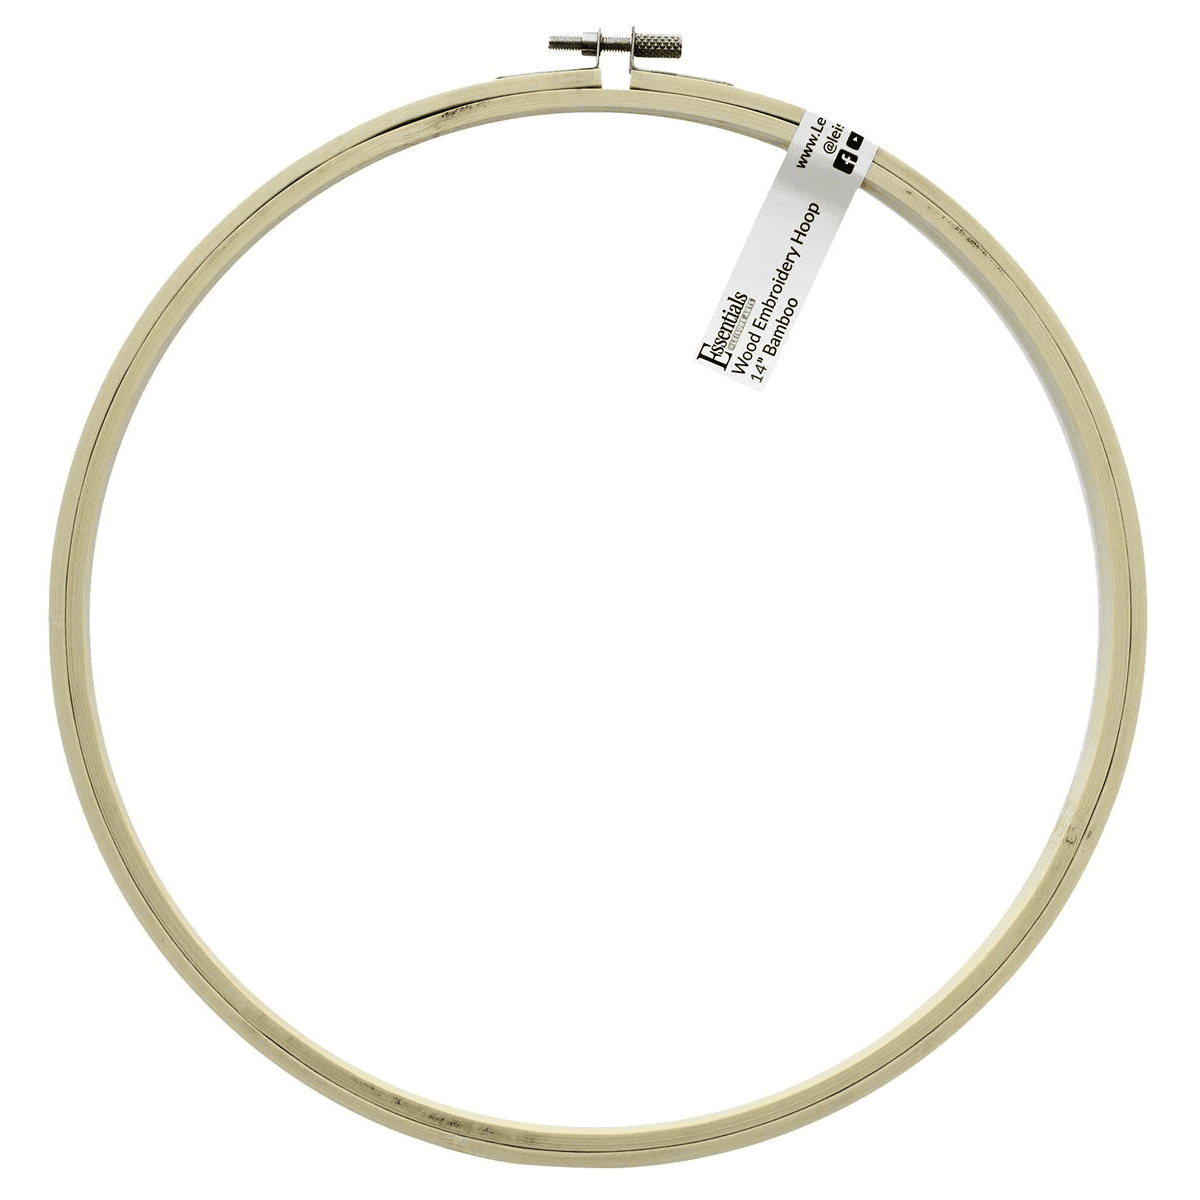 Essentials by Leisure Arts Wood Embroidery Hoop 14 in. Bamboo